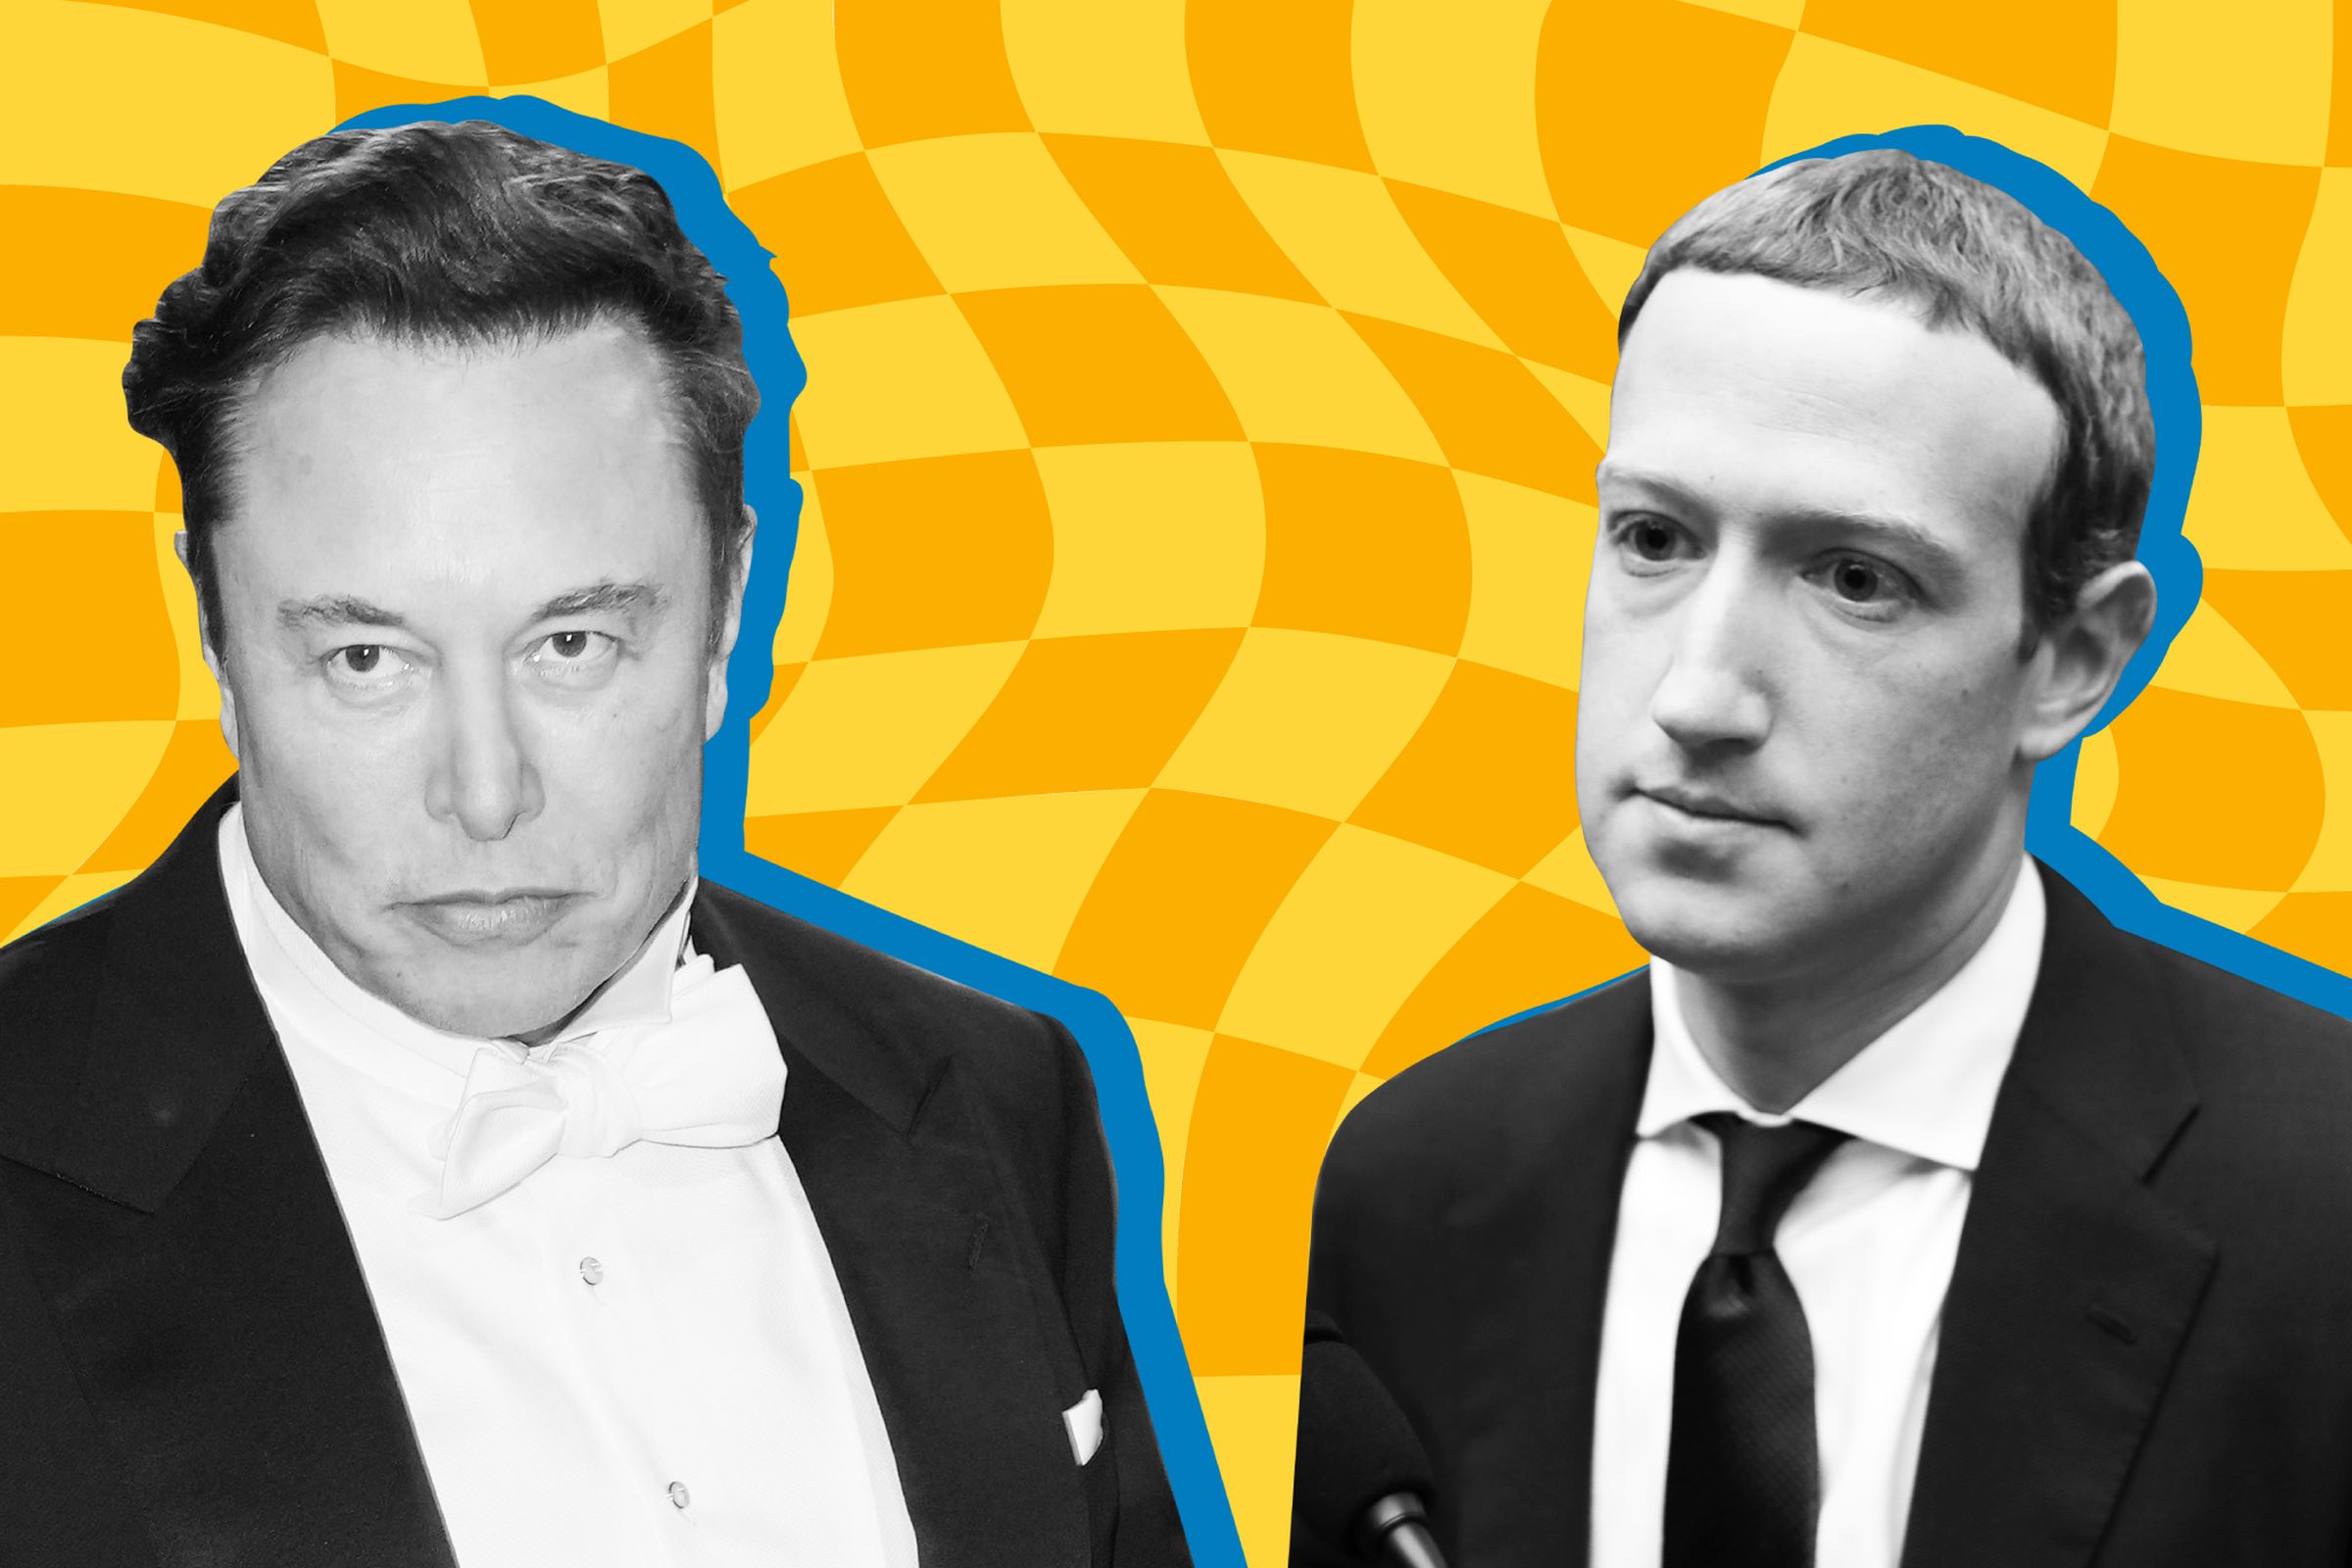 Black and white images of Elon Musk (left) and Mark Zuckerberg (right) superimposed on a wavy, orange-and-yellow checkerboard pattern.